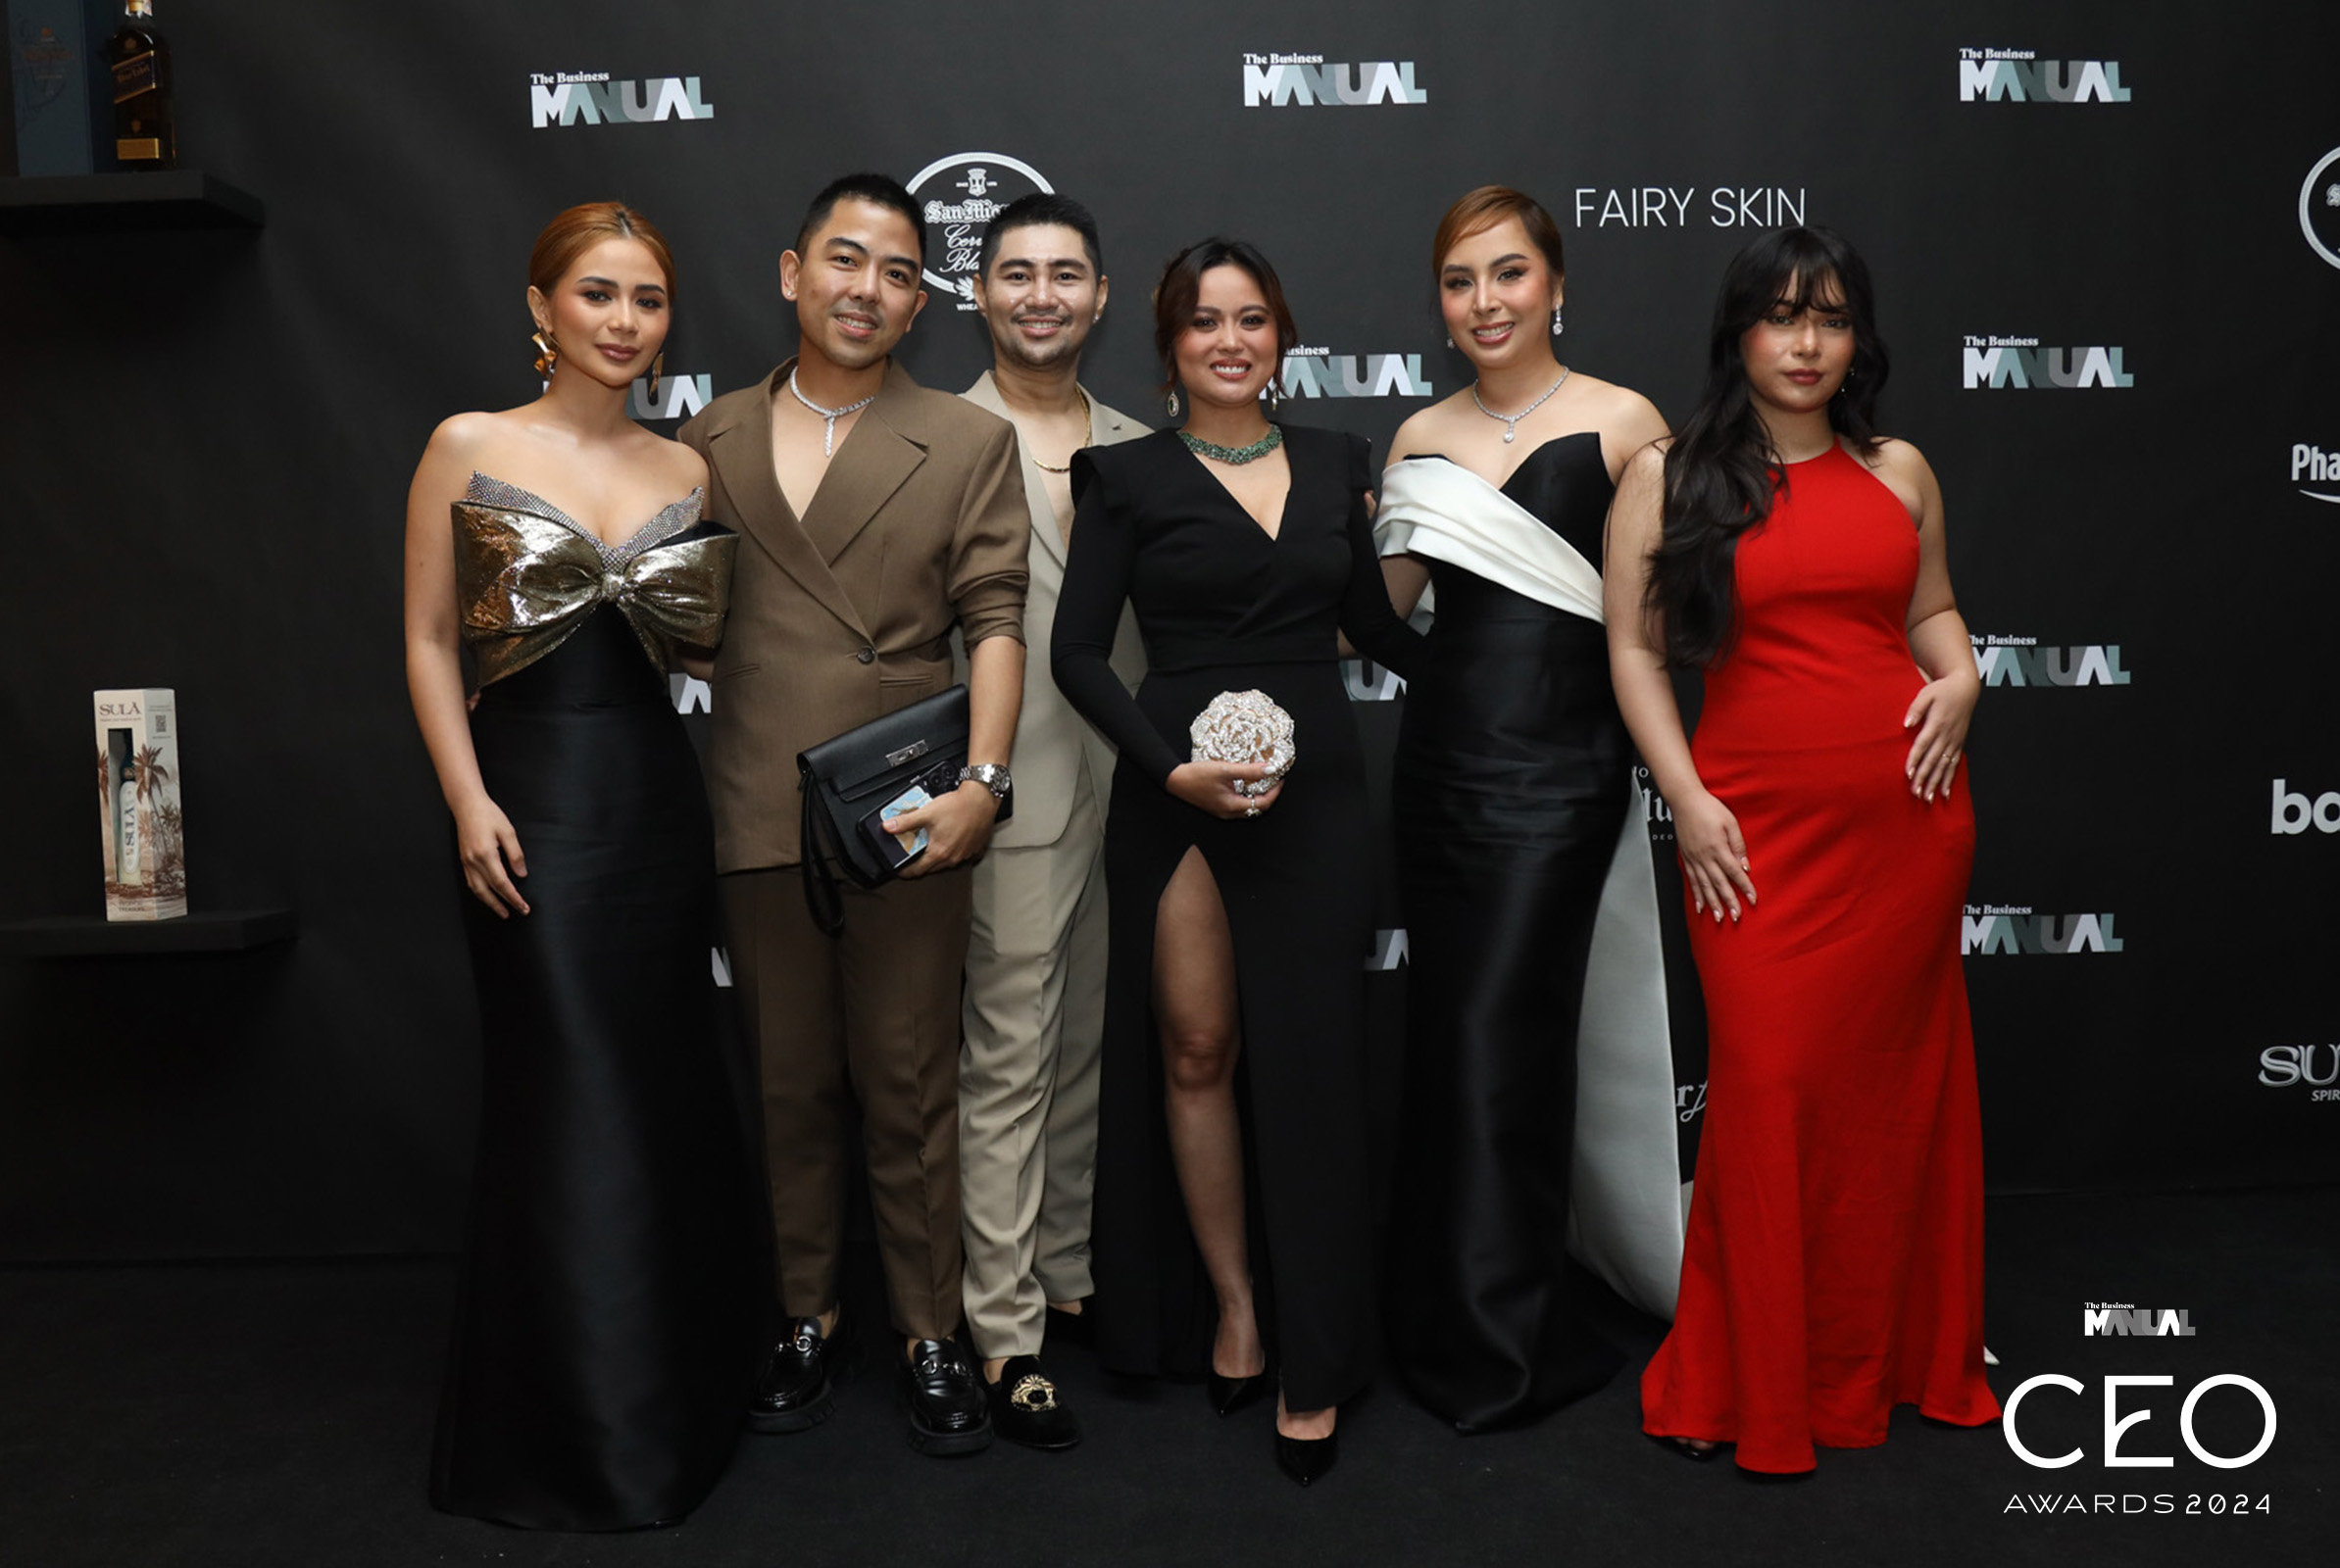 In the photo [L-R]: Luxe Wax CEO Janine Carlos, Gluta Lipo makers Jeff Tan and Leo Ortiz, Juju Glow Founder and CEO Acee Paita, Luxe Skin CEO Anna Magkawas, Dear Face CEO Jonah Sison-Ramos, and Babe Formula CEO Paula Hilario